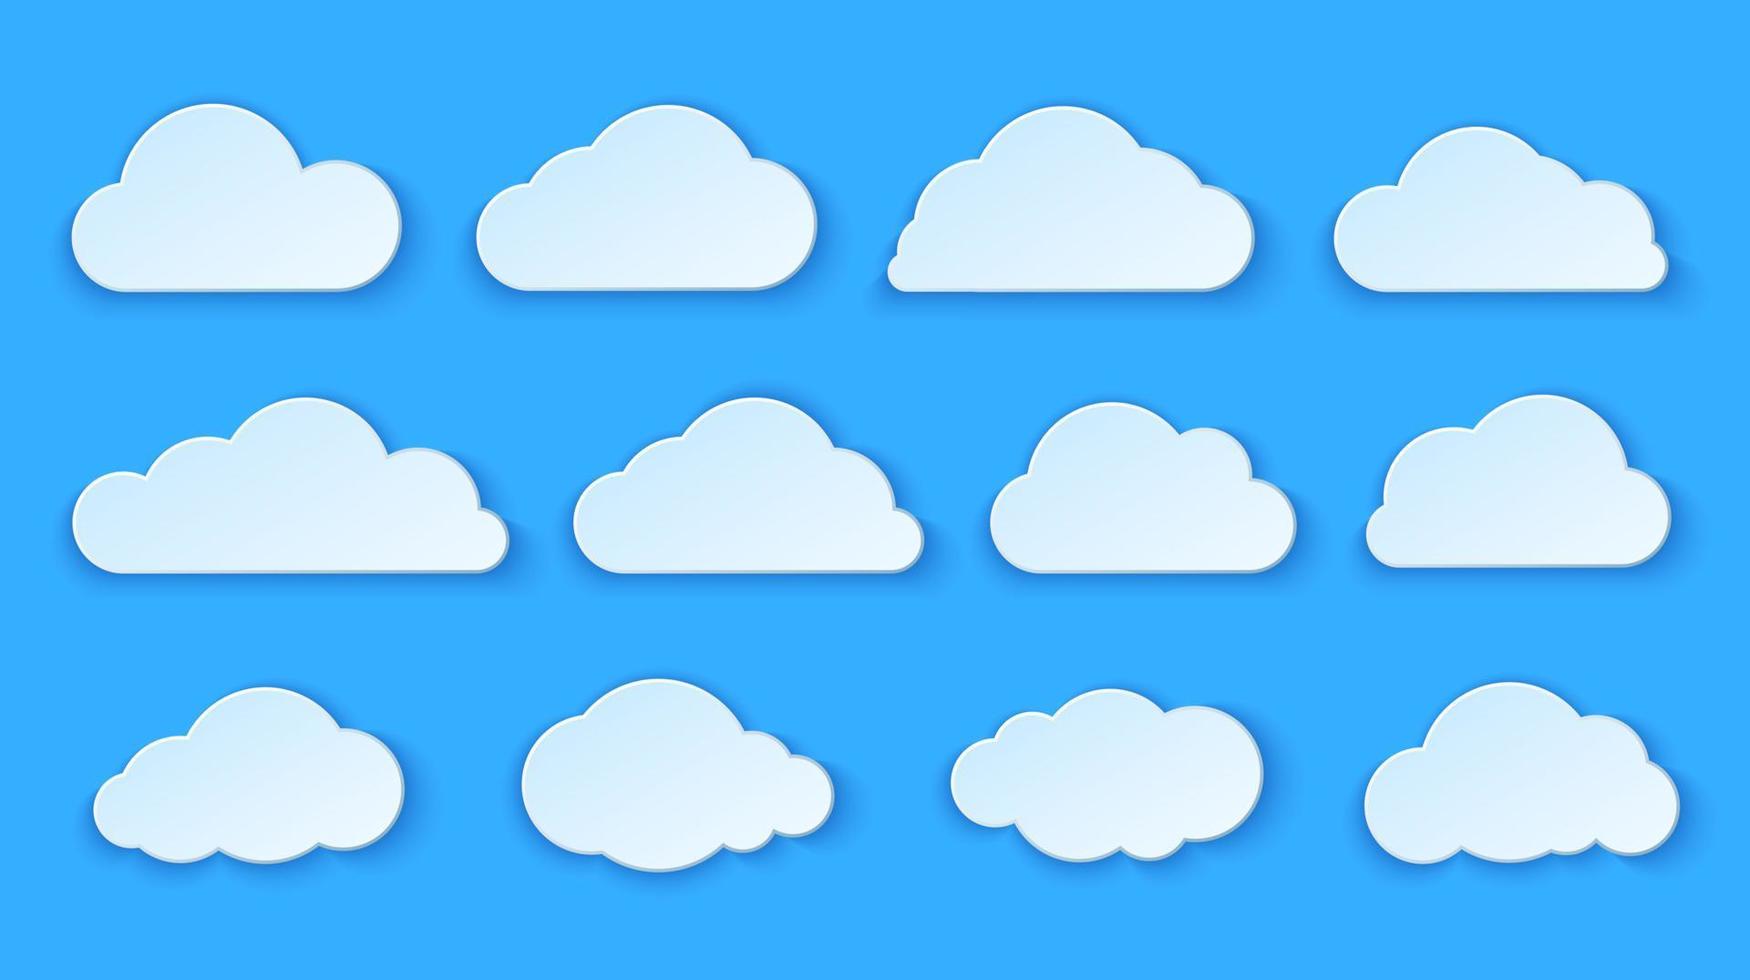 Abstract paper clouds set. Paper clouds design on blue background. Vector illustration